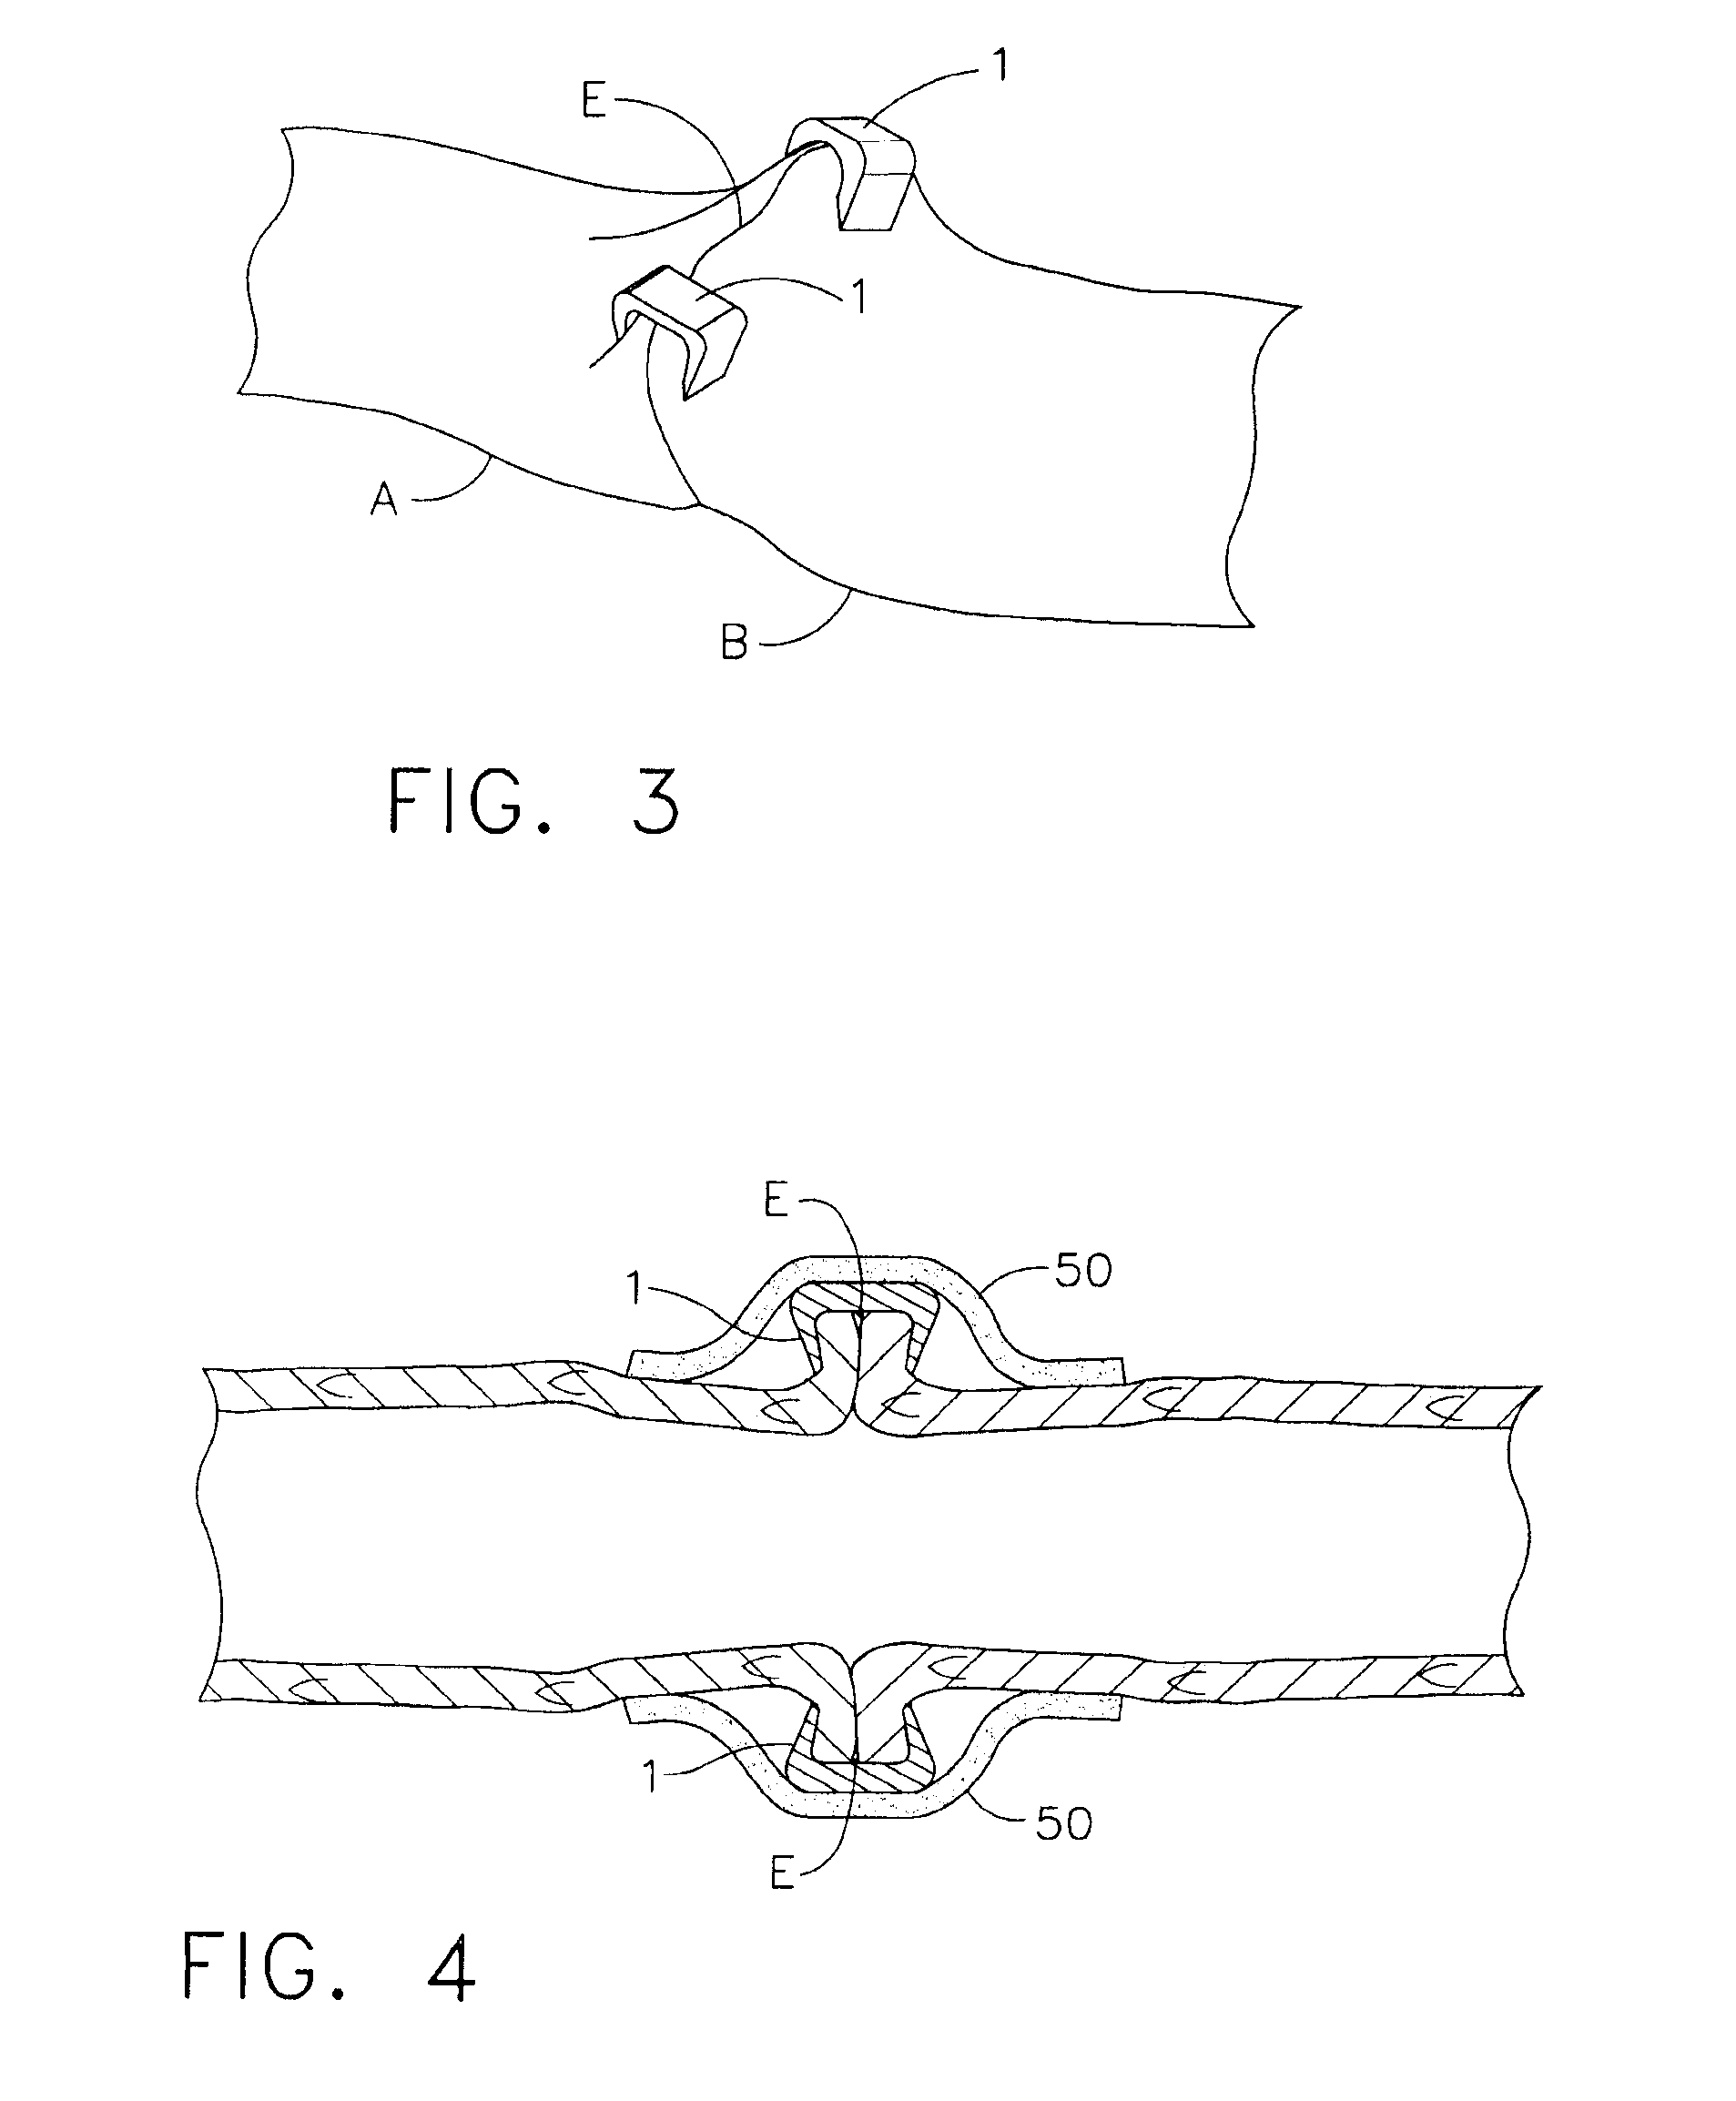 Method and Device for Effecting Anastomosis of Hollow Organ Structures Using Adhesive and Fasteners